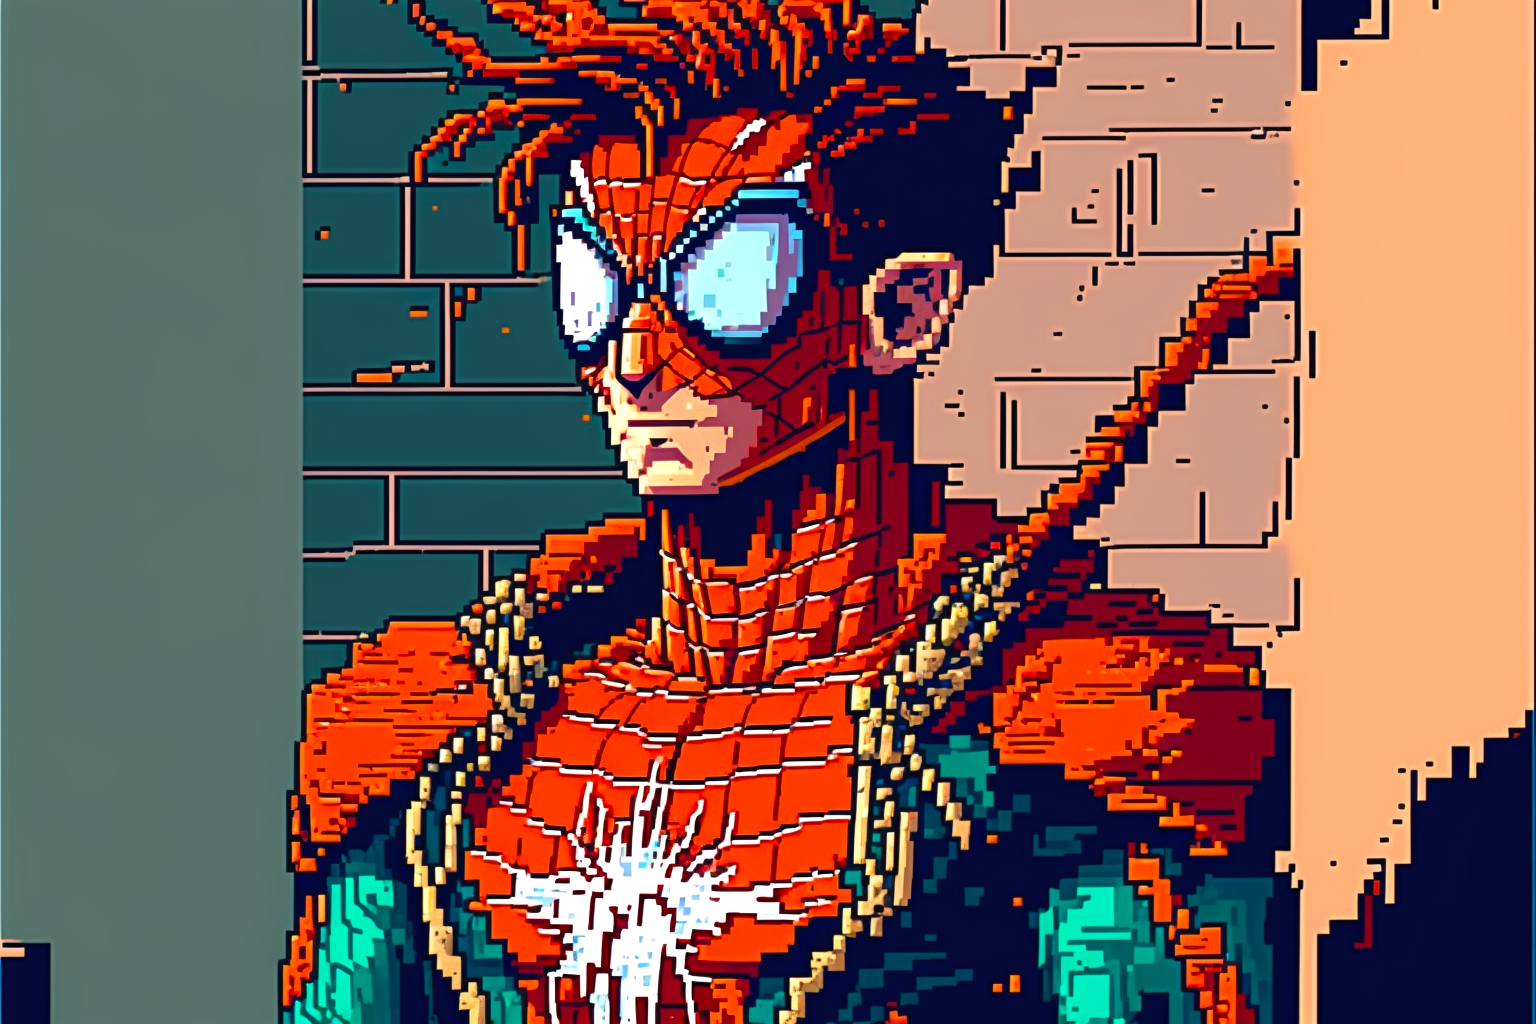 SOM18174_A_beautiful_colorful_fully_anime_pixel_art_of_spiderma_cad81d27-d325-46a2-94ed-09755fbe18bb.png